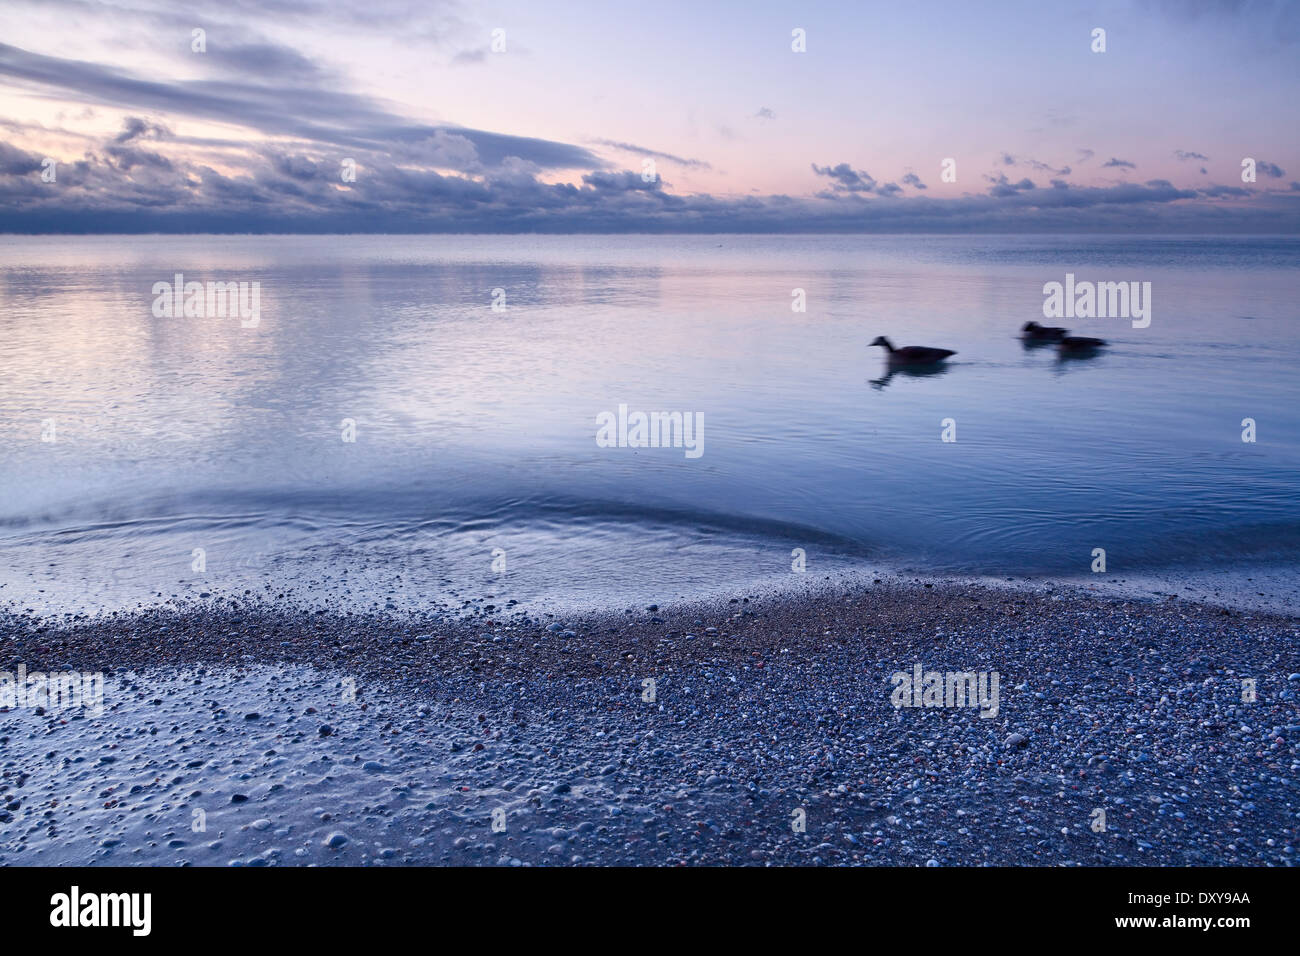 Three birds swimming on Lake Ontario with ice covered stones at dawn, Scarborough Bluffs in Bluffer's Park, Scarborough, Ontario Stock Photo